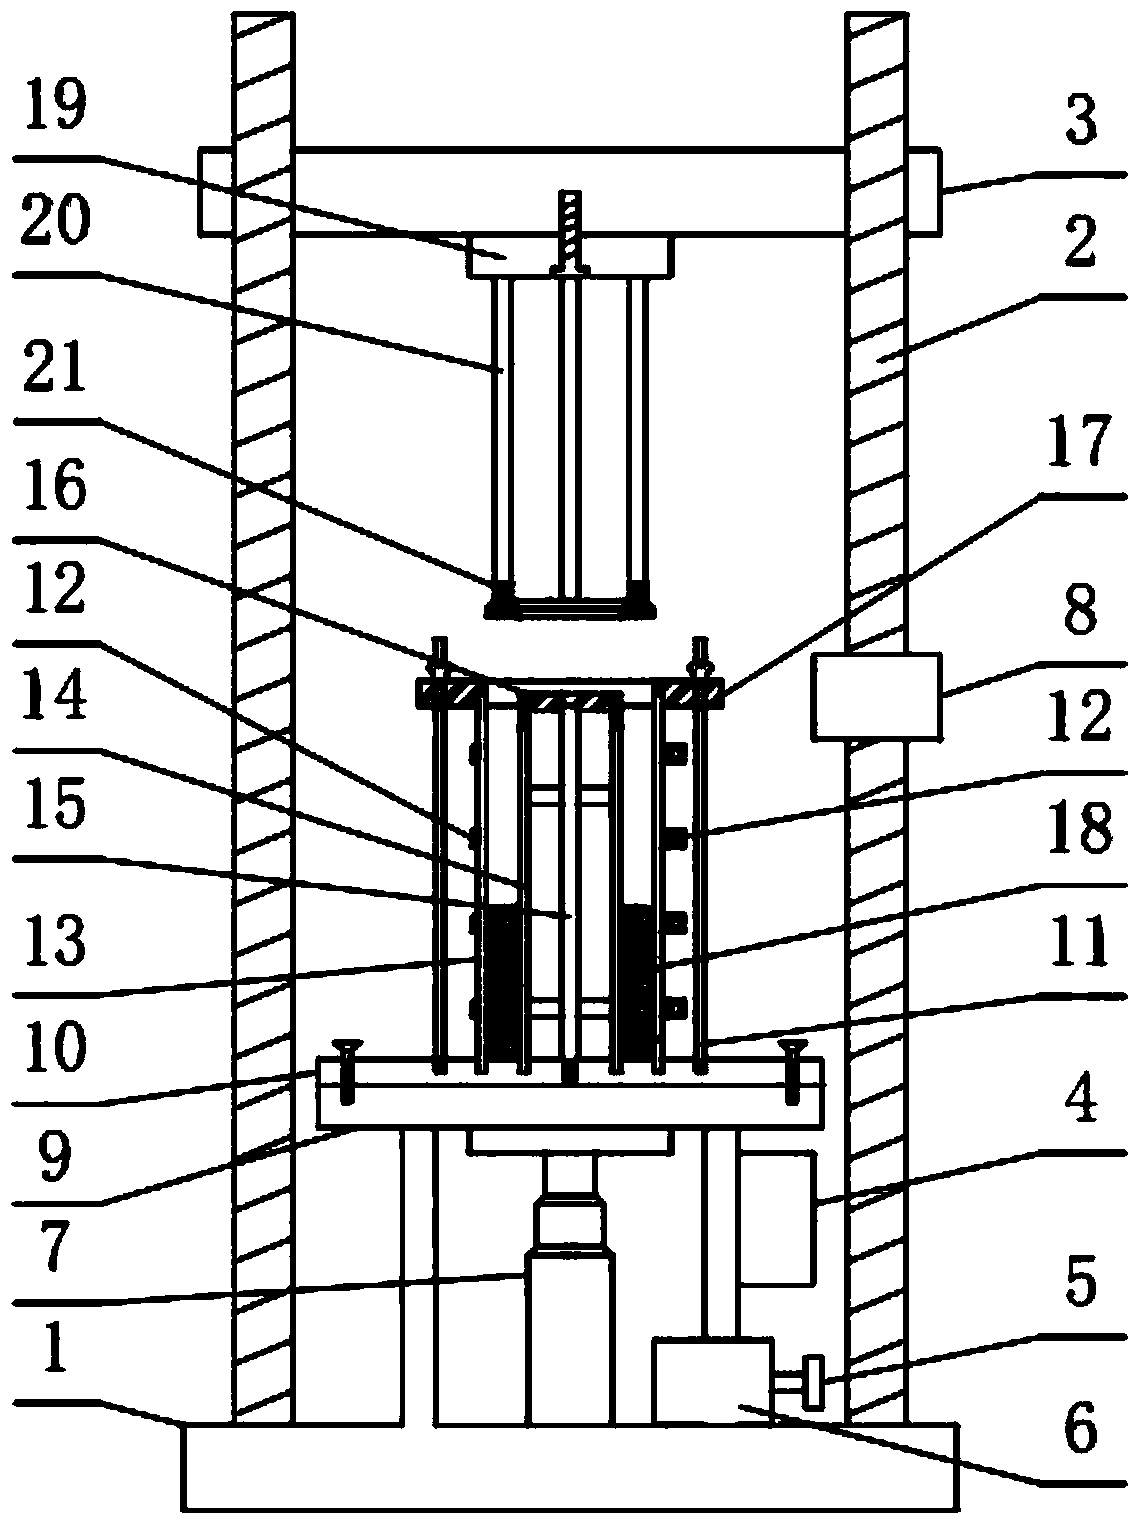 Semi-automatic multifunctional soil test sample compaction device